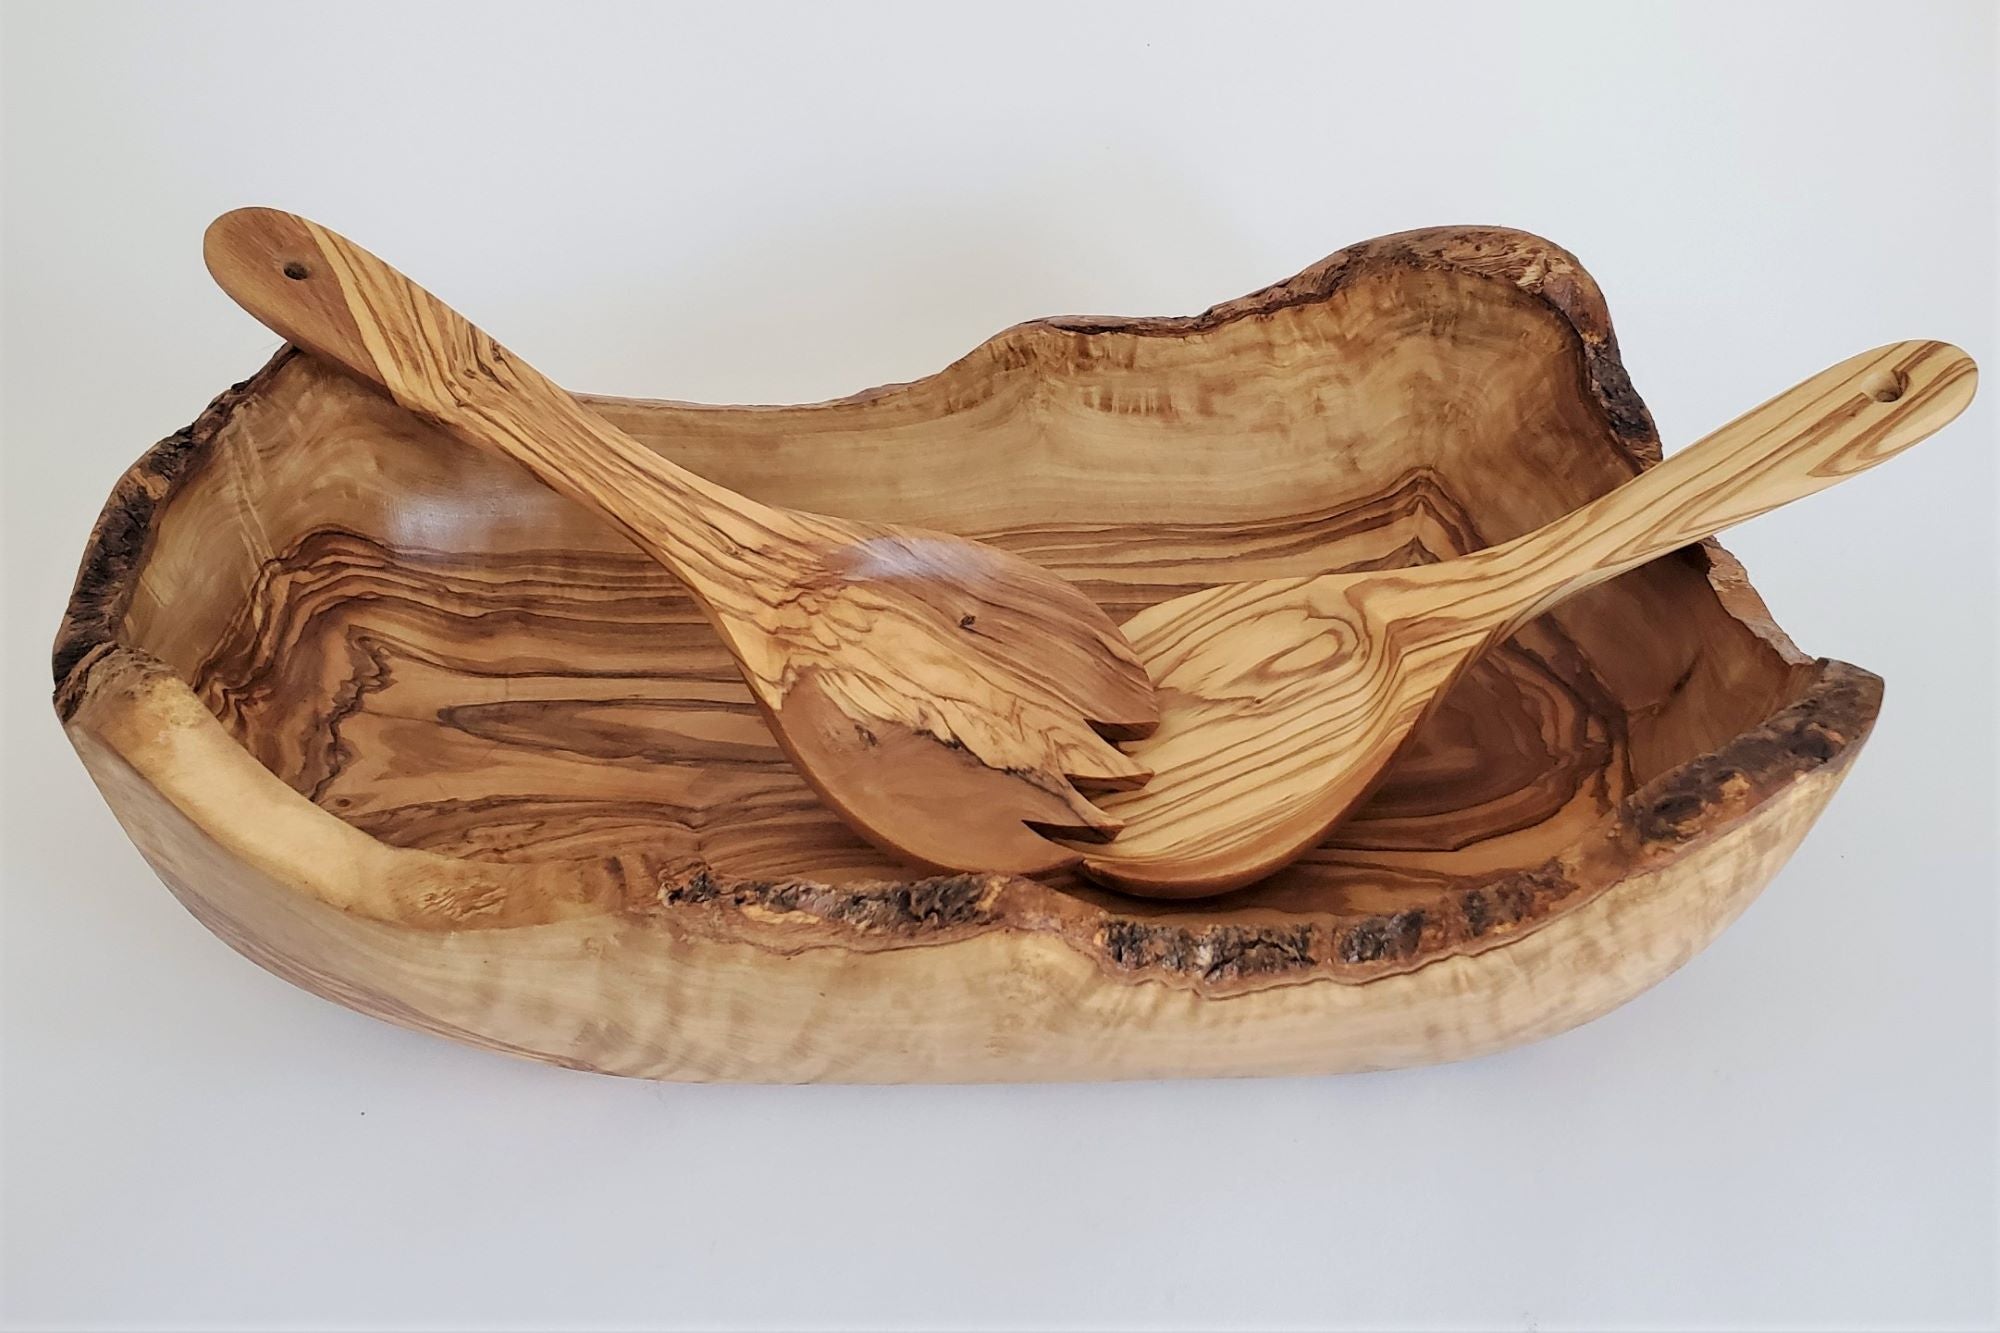 6-Inch Hand-carved Olive Wood Bowl Handmade and Fair Trade - Drop Shipping  By Global Crafts